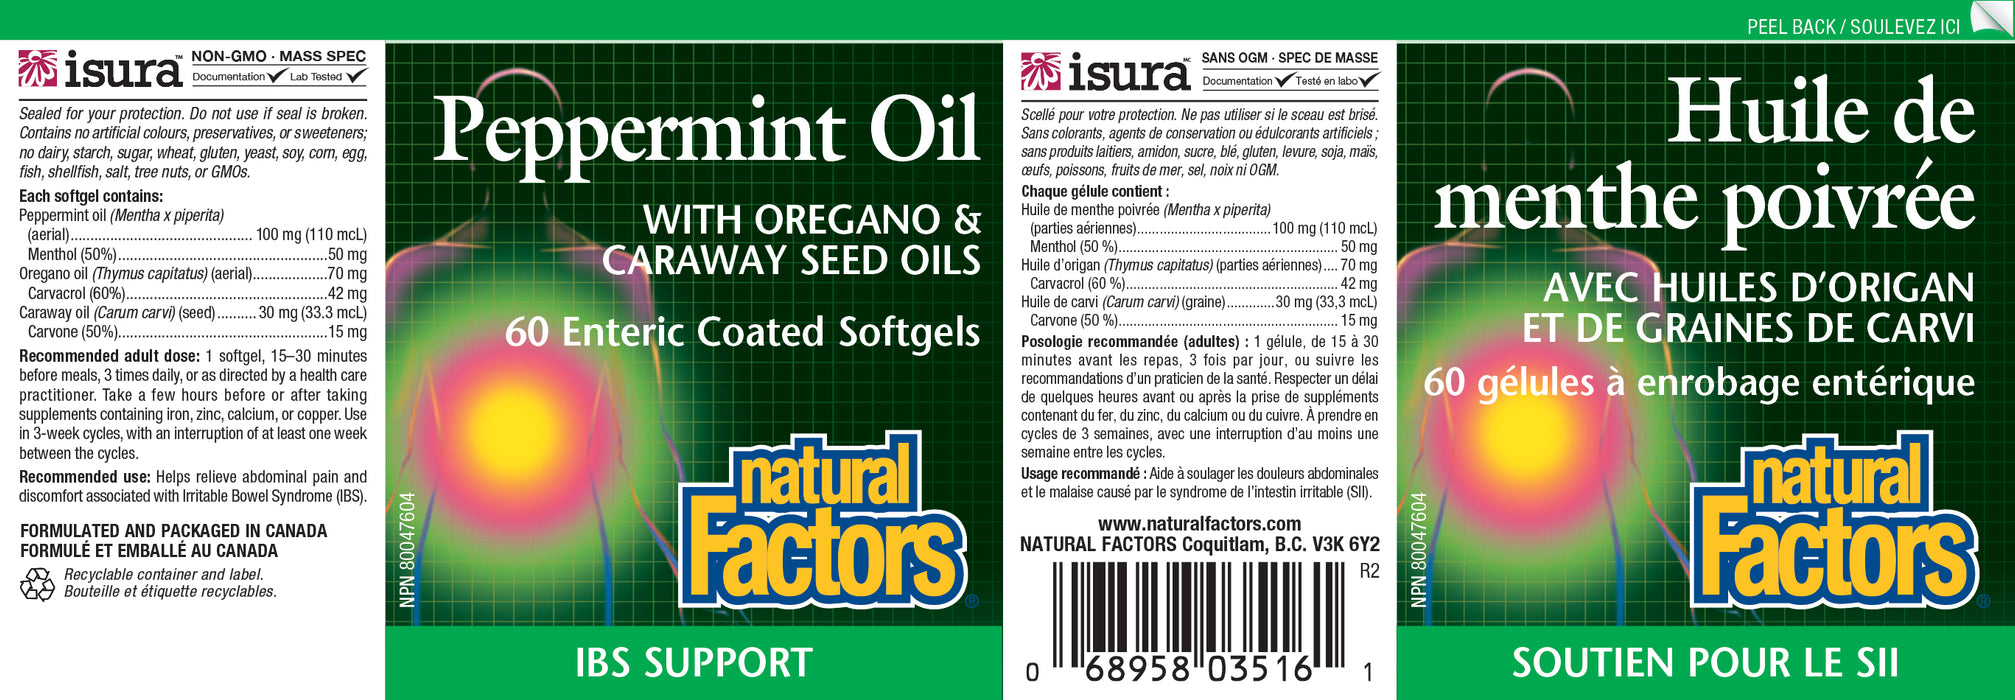 Natural Factors Peppermint Oil with Oregano & Caraway Seed Oils 60 Enteric Coated Softgels